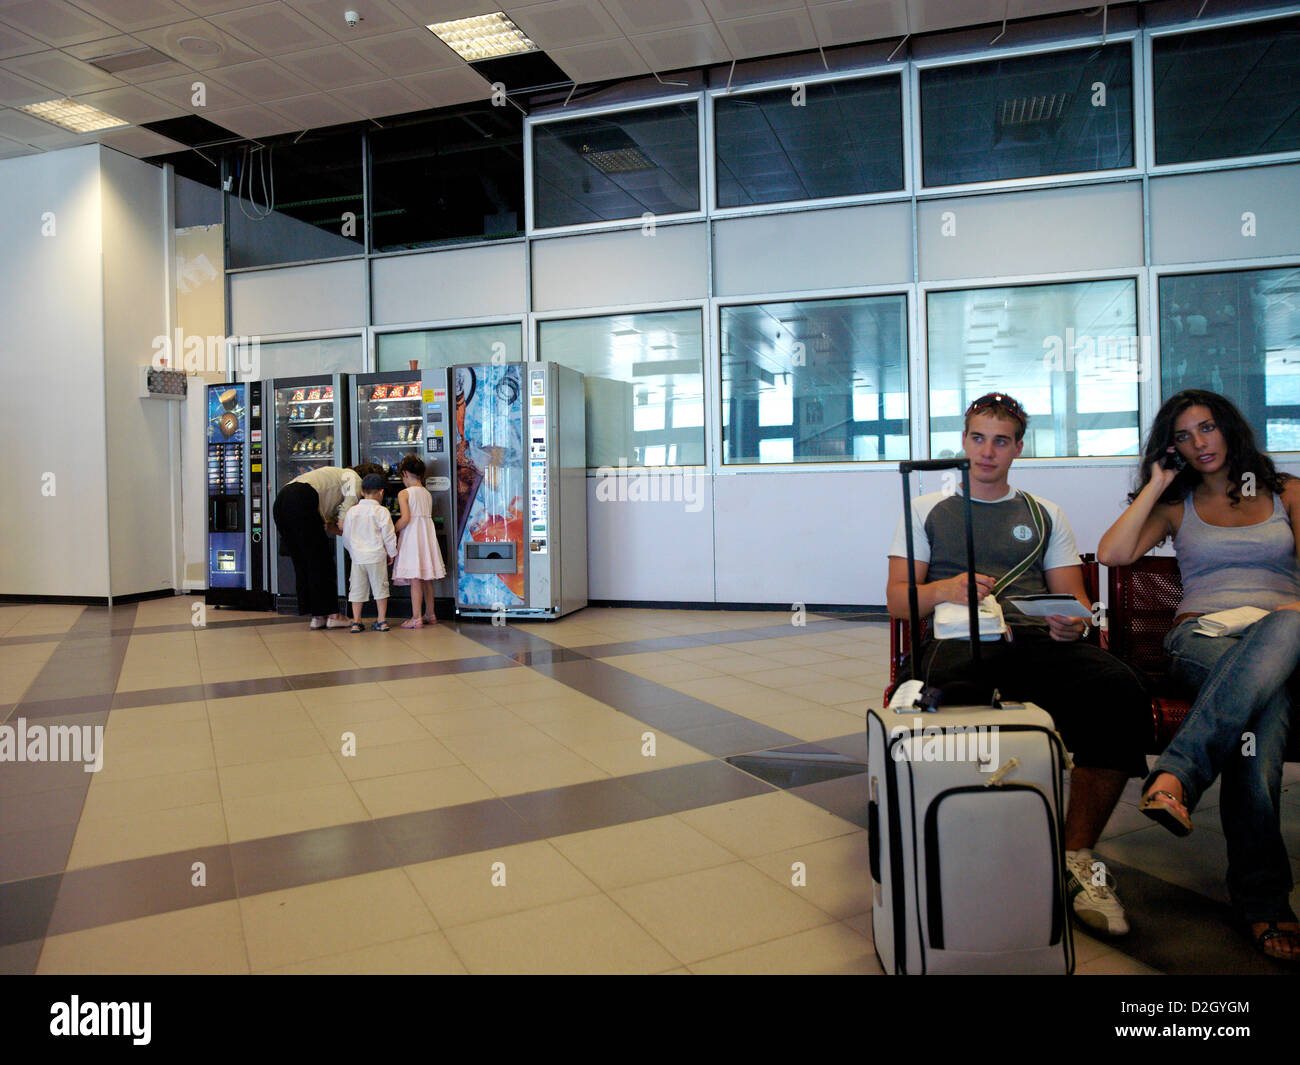 Palermo Airport Sicily Italy Departure Lounge Passengers Waiting and Drinks Machines Stock Photo